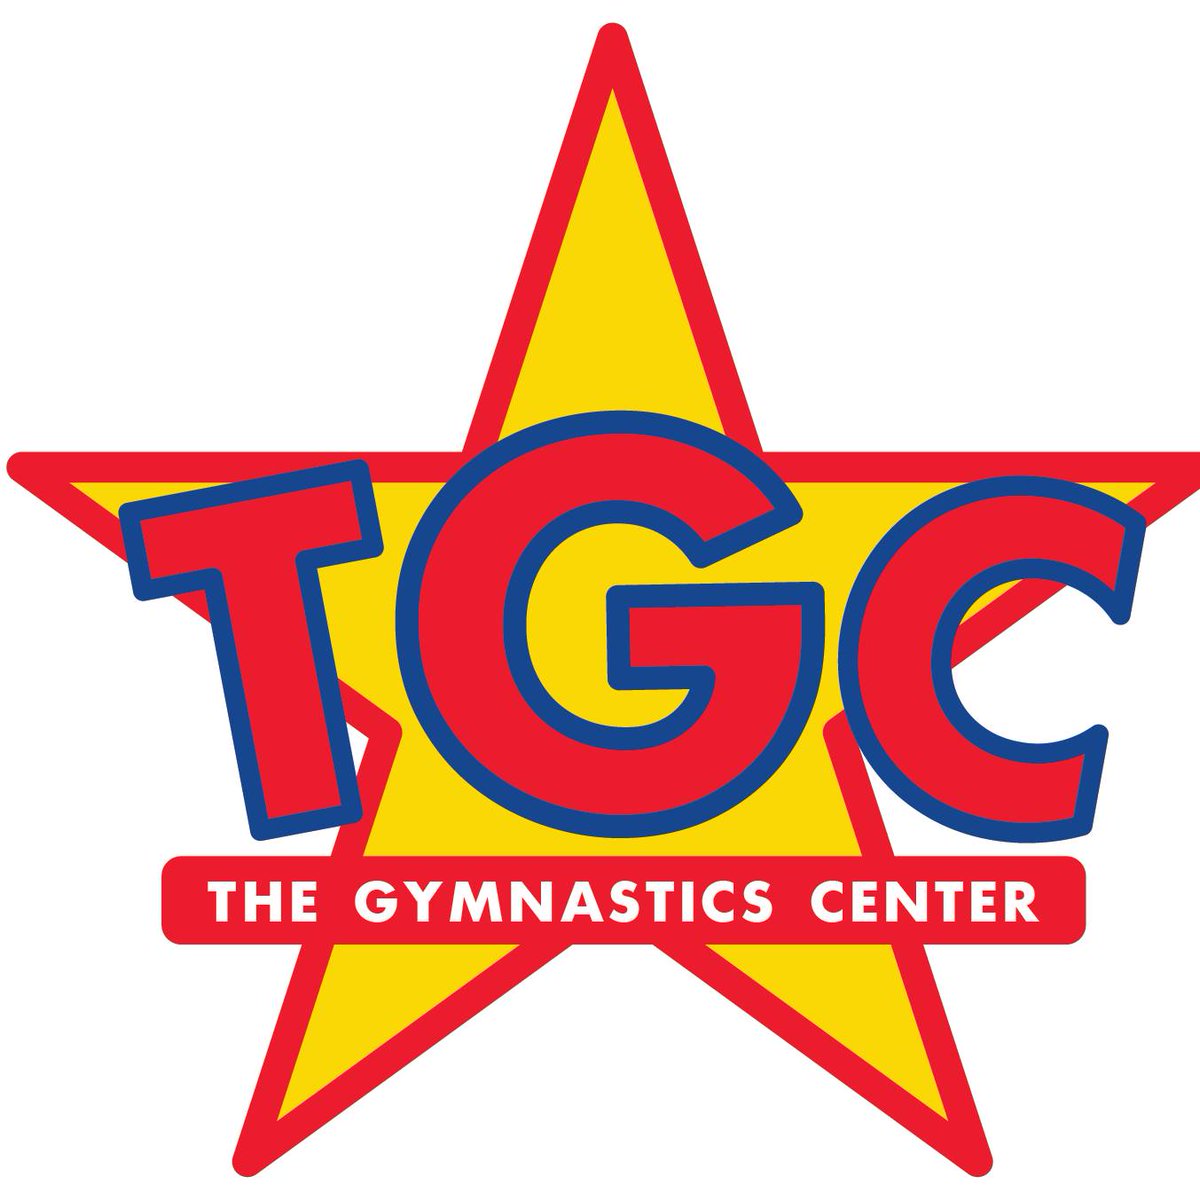 NEW PROJECT ANNOUNCEMENT!

A second exciting project beginning next week at The Gymnastics Center in OH 🏅🏅🏅

This impressive facility has established itself as a leader in the indoor gymnastics space!

Learn more: hubs.ly/Q01wnCBN0

#TGC #Cincinnati #OH #linersystem